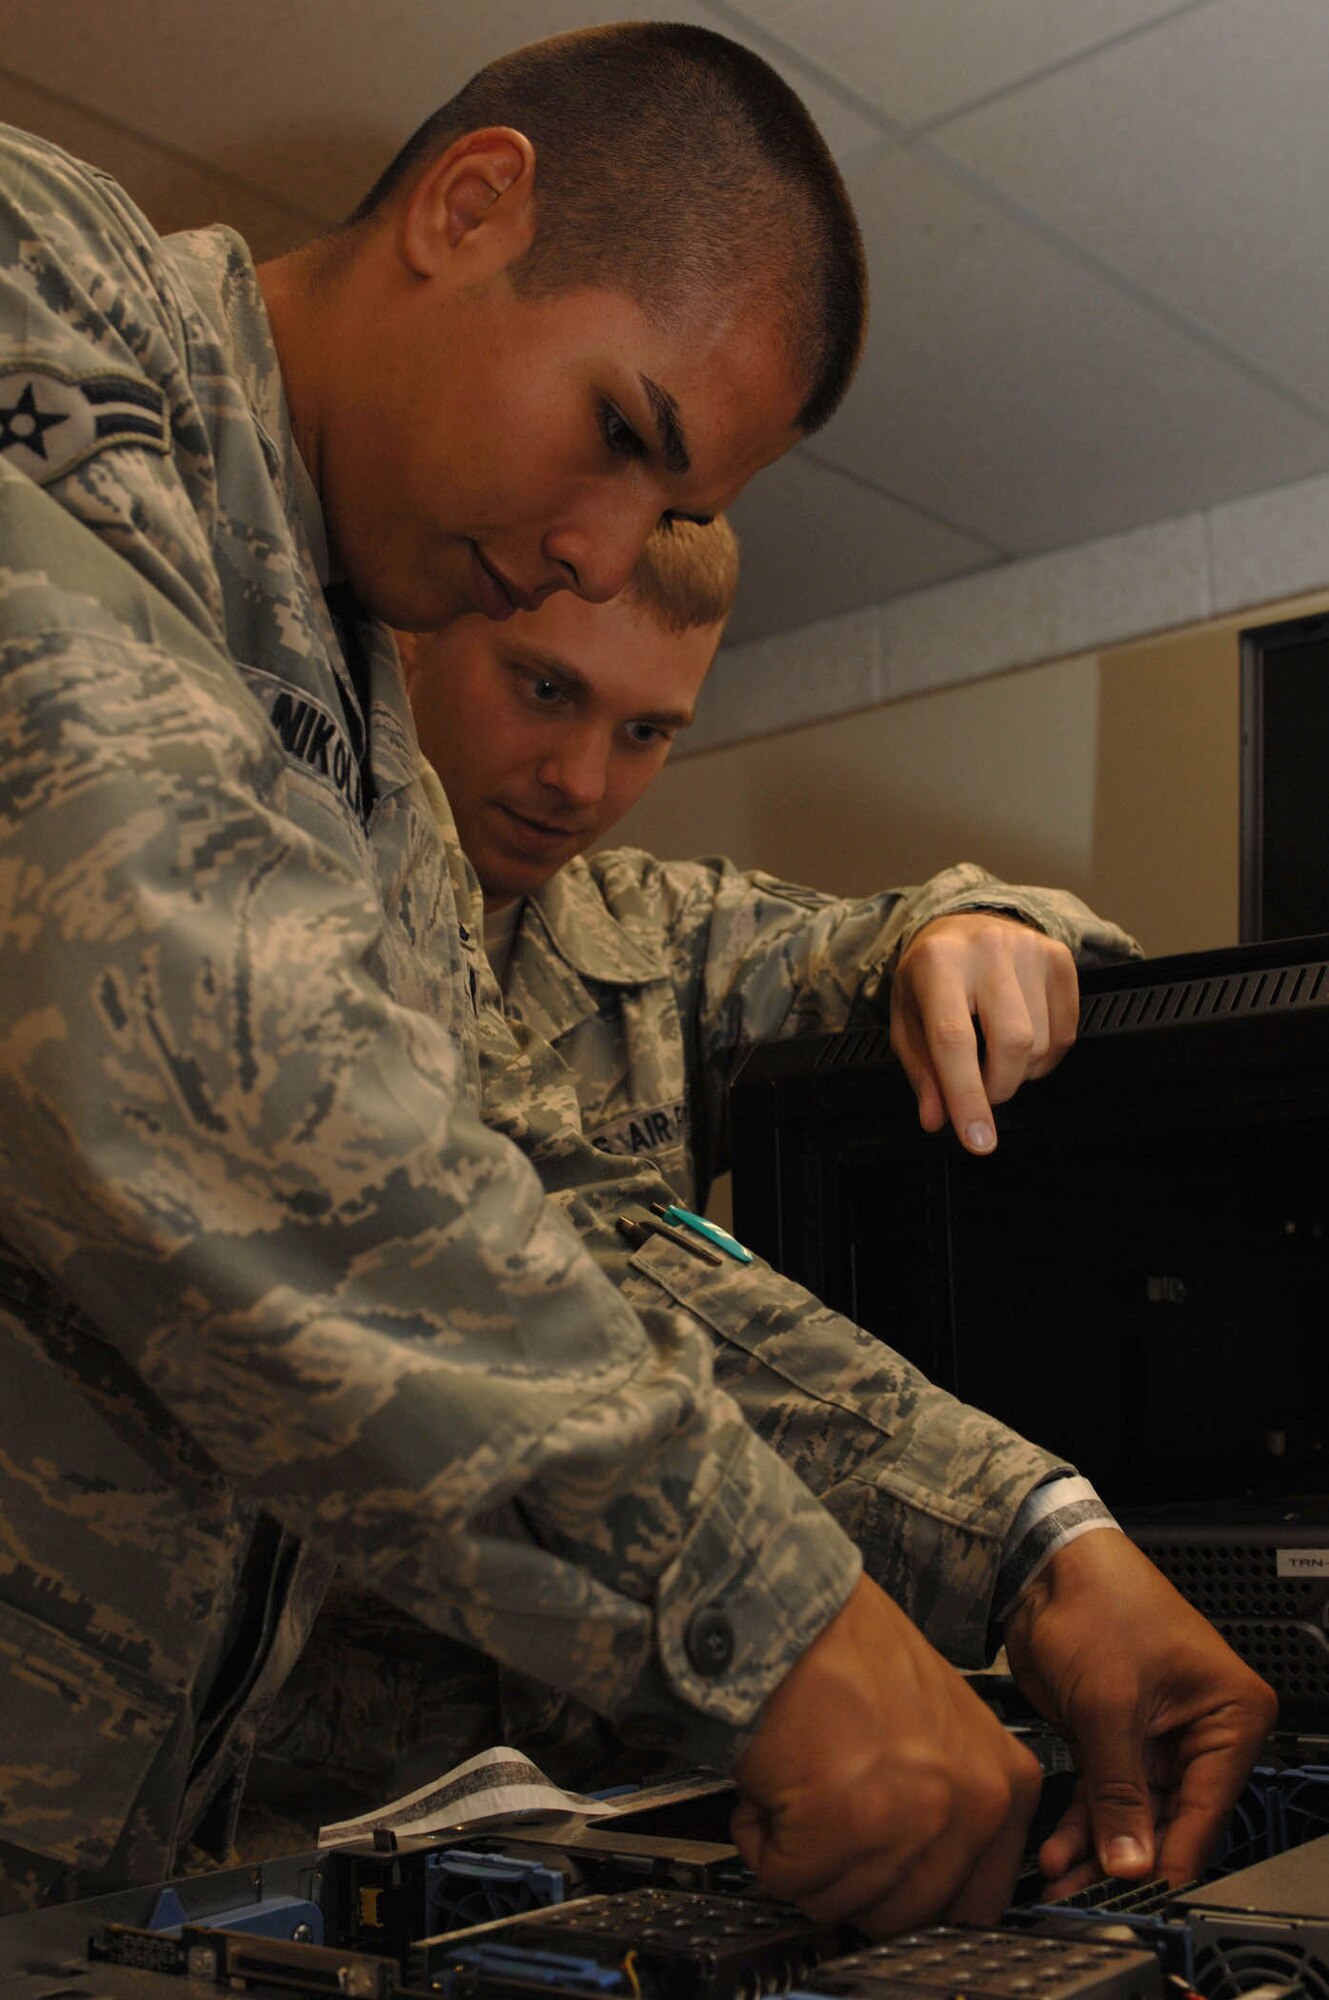 Staff Sgt. David Walker observes Airman 1st Class Mark Nikolas replacing a server memory card in the Network Control Center on Seymour Johnson Air Force Base, N.C., Sept. 16, 2009. Airmen working in the NCC are responsible for maintaining all data storage and e-mail servers and patching all systems. Sergeant Walker and Airman Nikolas are 4th Communications Squadron network operations technicians (U.S. Air Force photo by Staff Sgt. Heather Stanton)